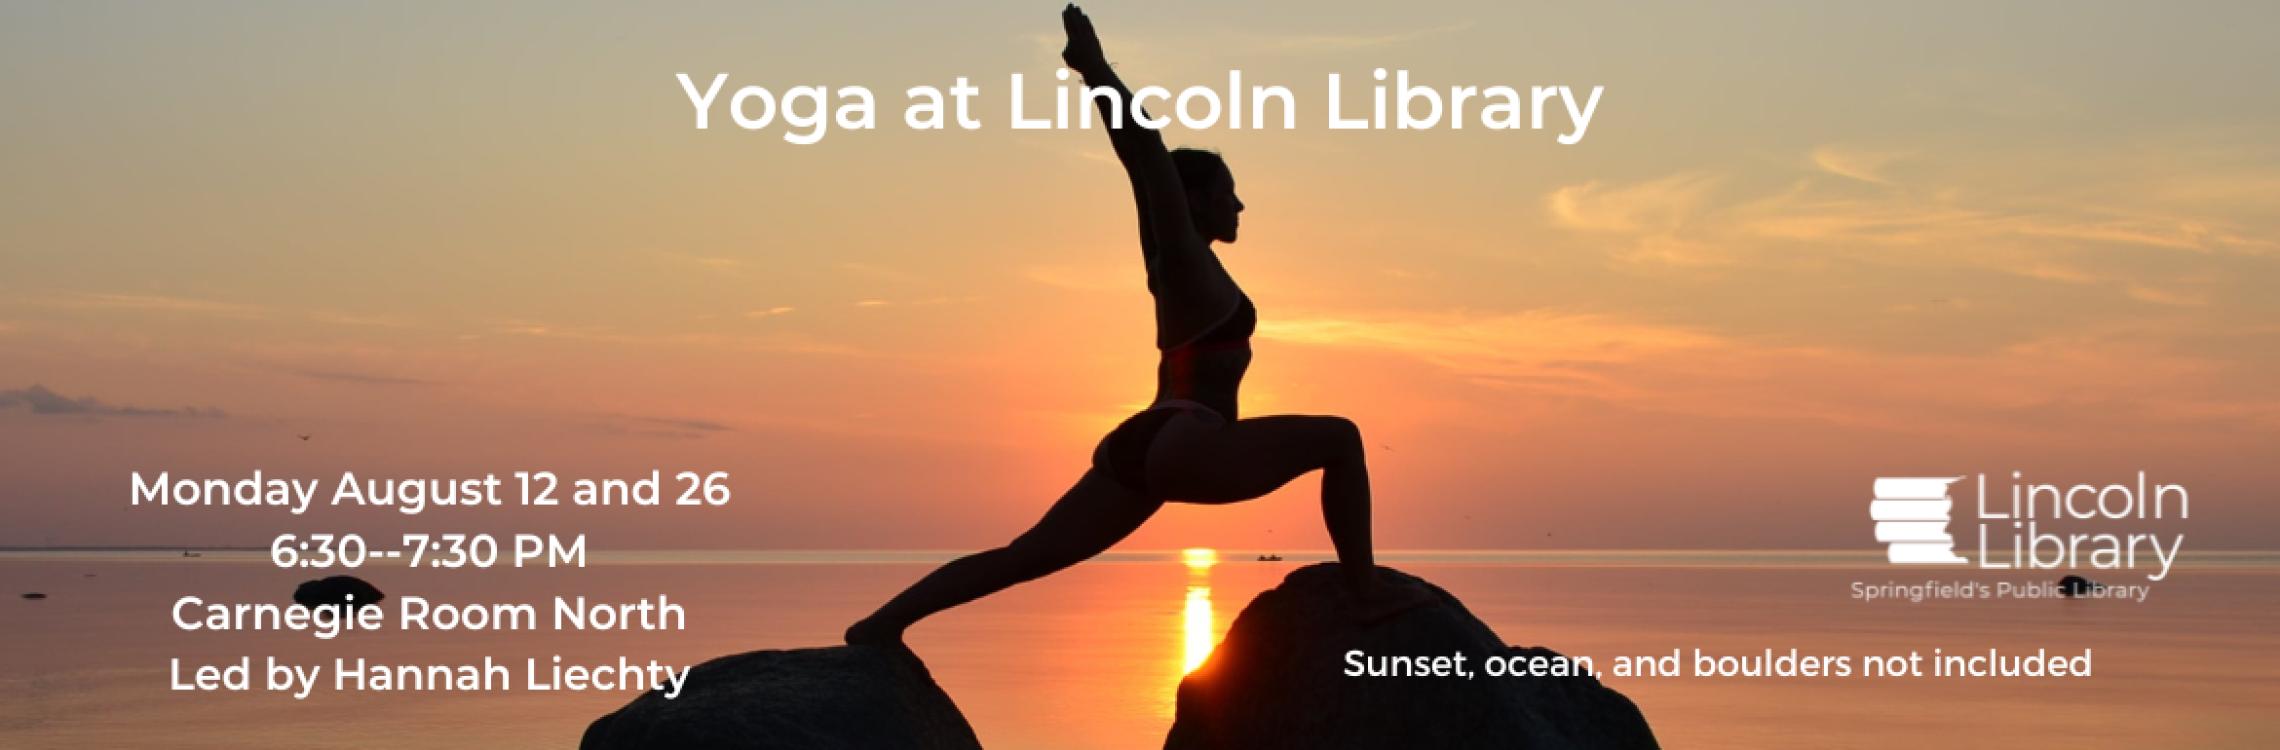 Yoga at Lincoln Library: Monday, August 12th and 26th 6:30-7:30pm. Led by Hannah Liechty.